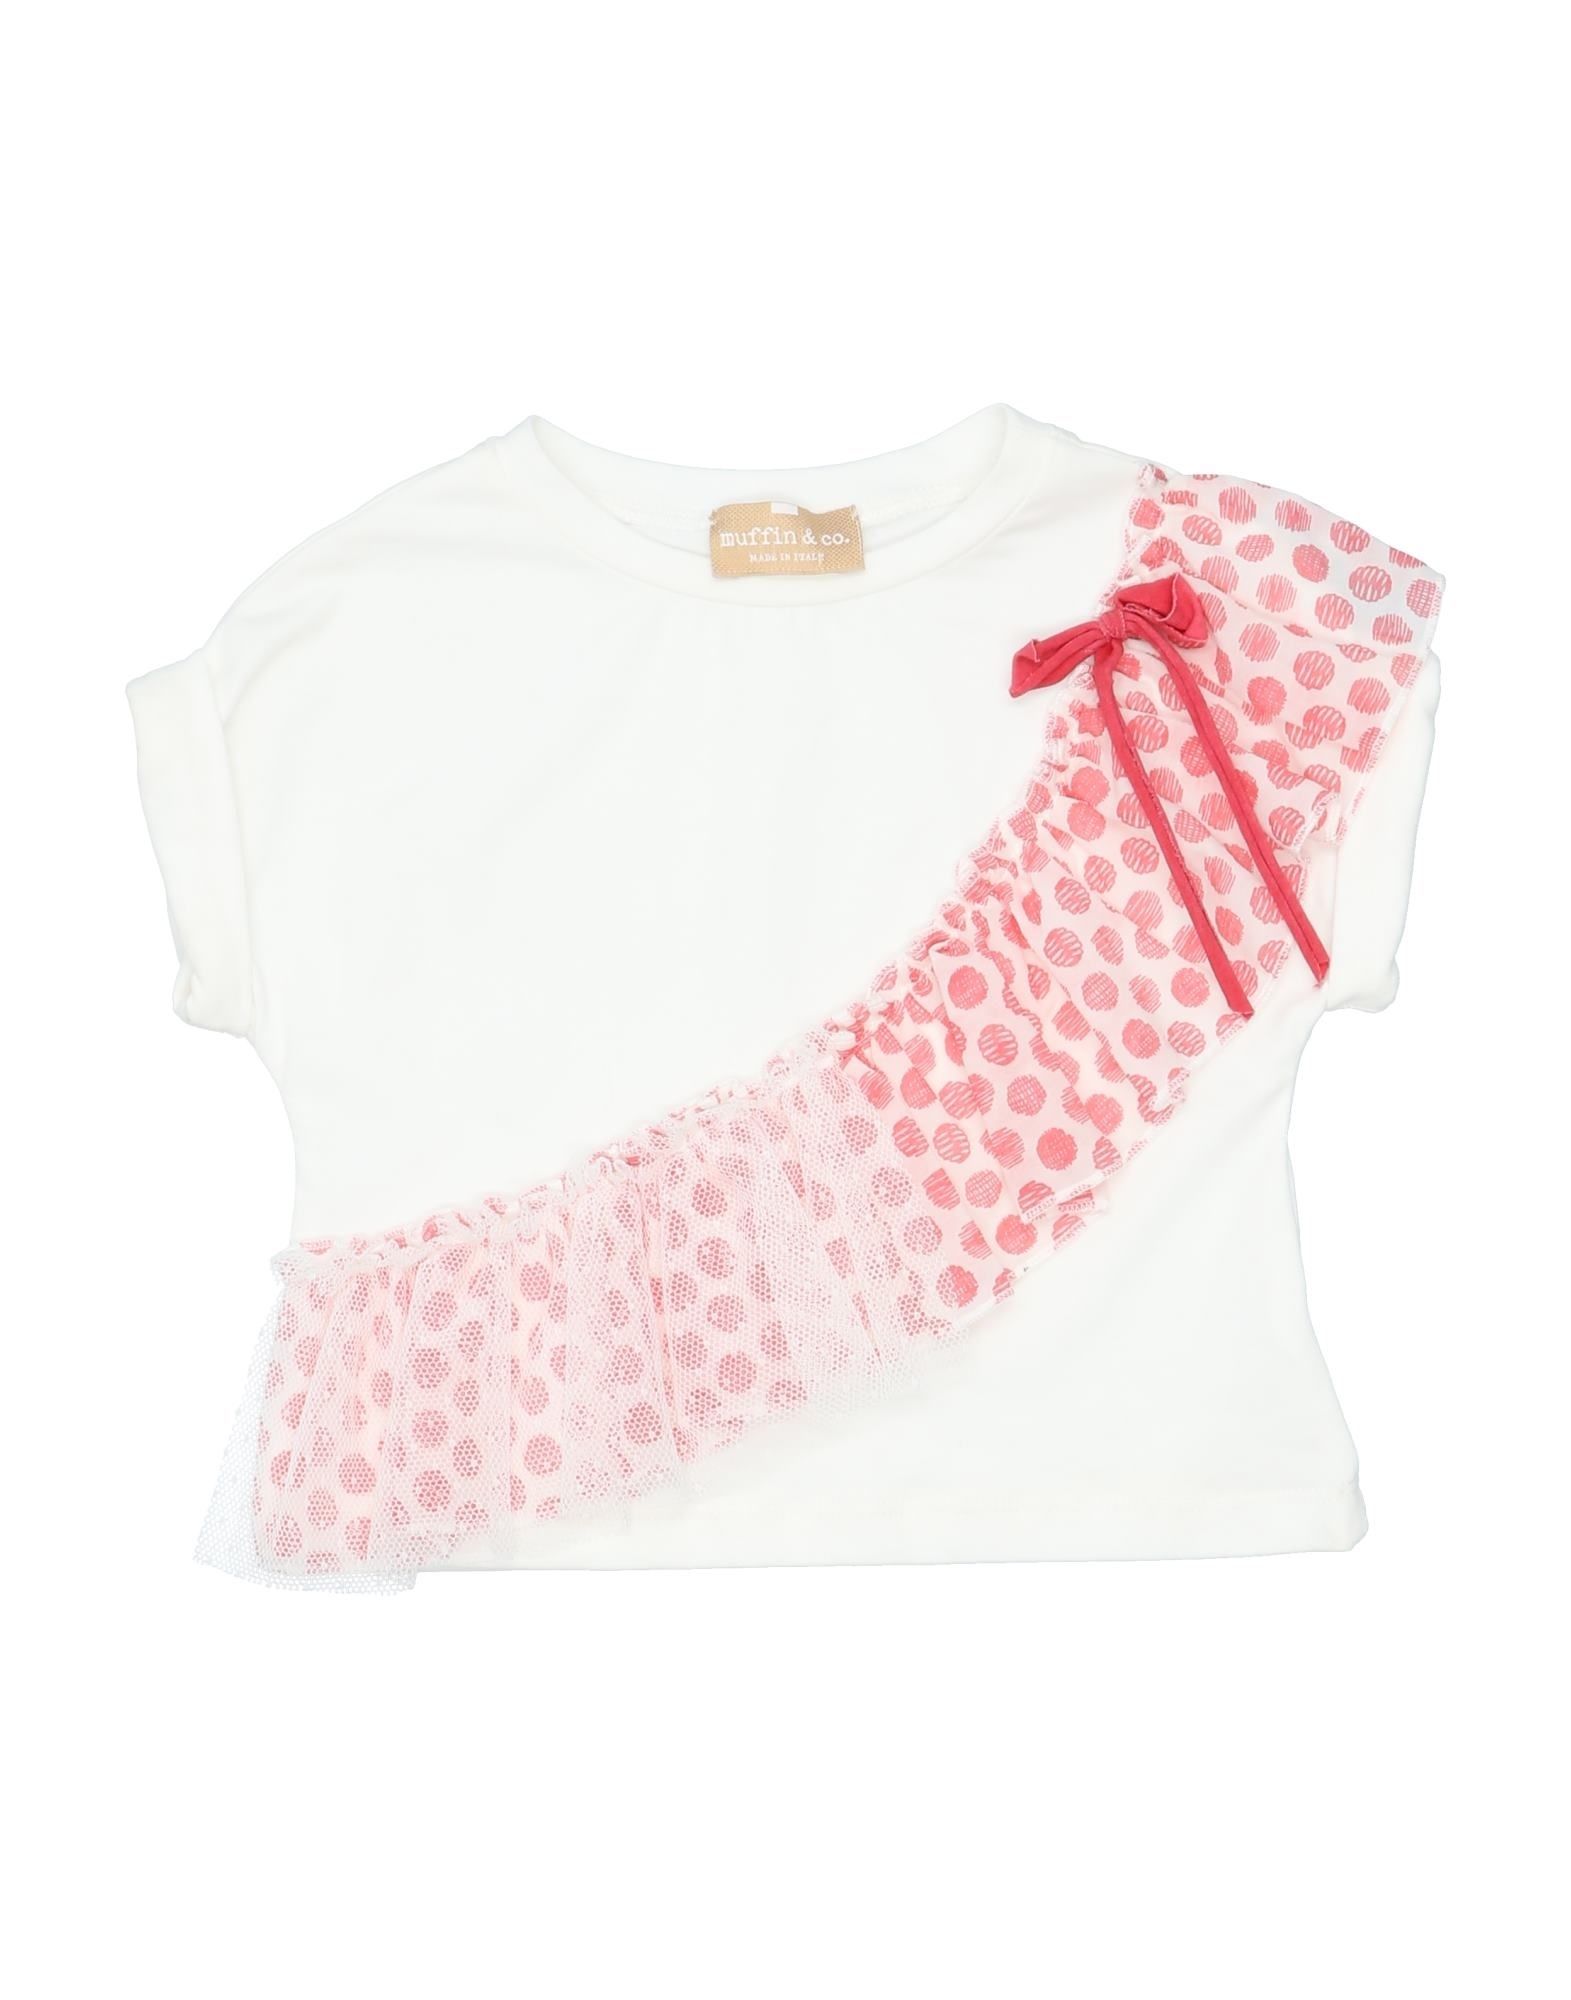 Muffin & Co. Kids' T-shirts In White